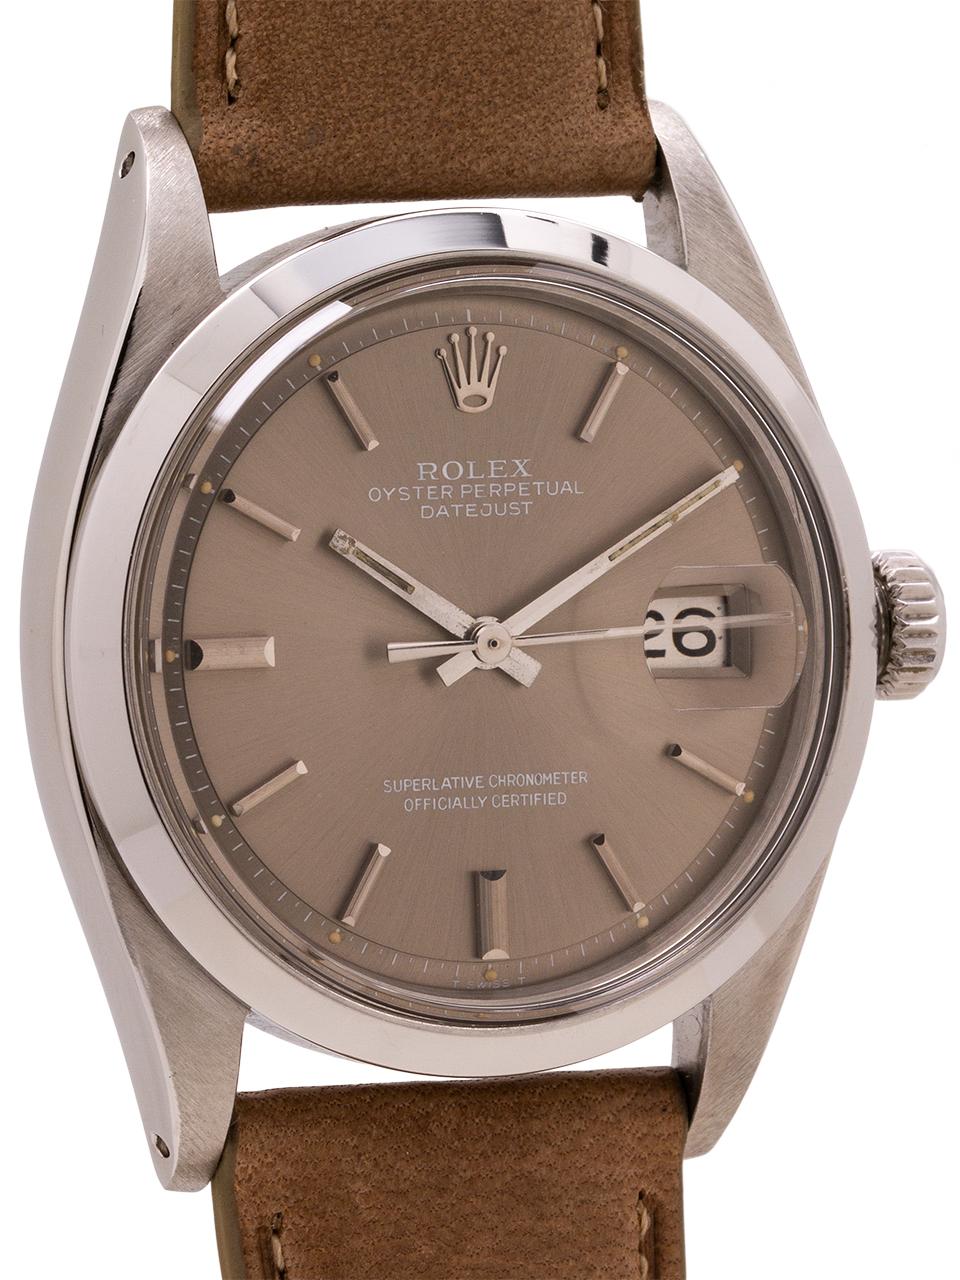 
Vintage Rolex Datejust ref# 1600 with smooth bezel and original grey metallic dial. Serial # 2.8 million circa 1971. Featuring a 36mm diameter case with original smooth bezel, acrylic crystal, with applied indexes and silver baton hands on the